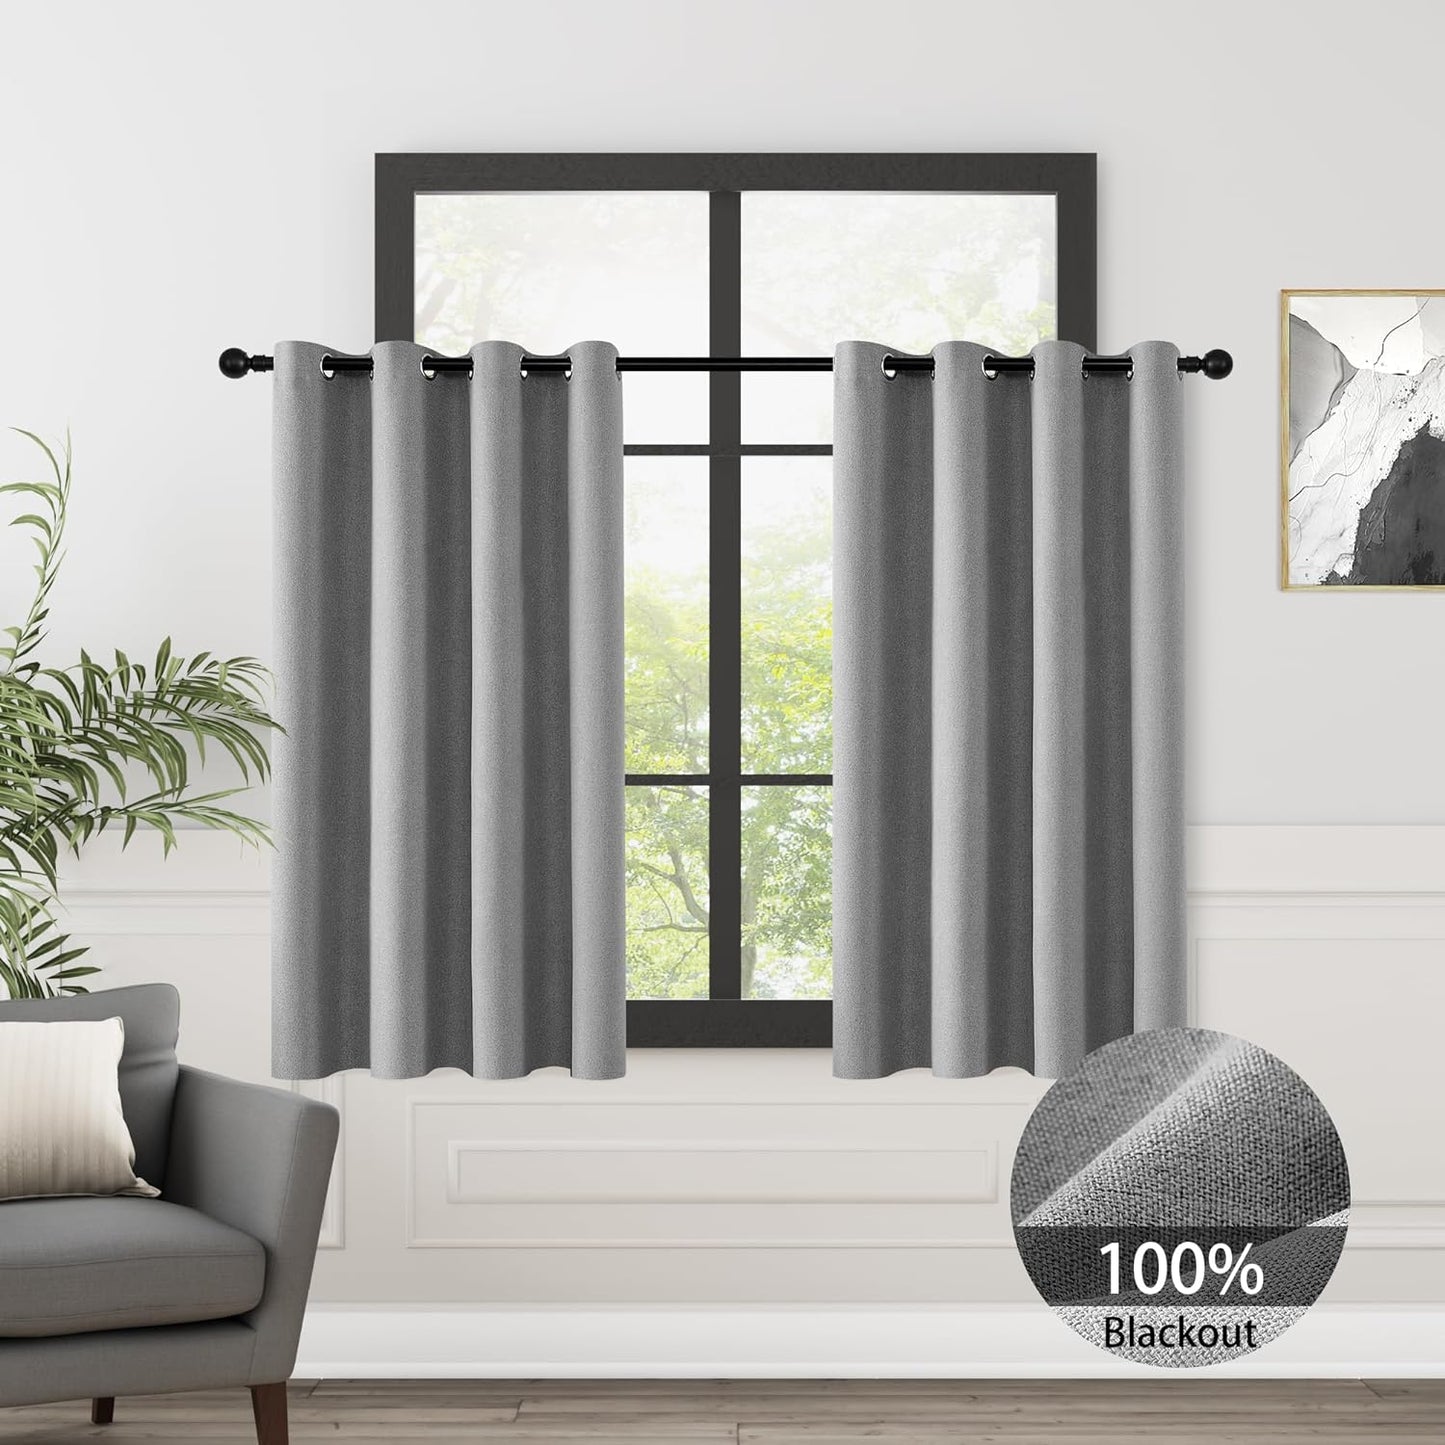 Full Blackout Curtains 84 Inches Long for Bedroom, Neutral Flax Linen Black Out Drapes, 2 Panels Grommet Room Darkening Curtains 84 Inch Length with Backing for Living Room Light Beige 52X84  ChrisDowa Grey 52W X 54L 